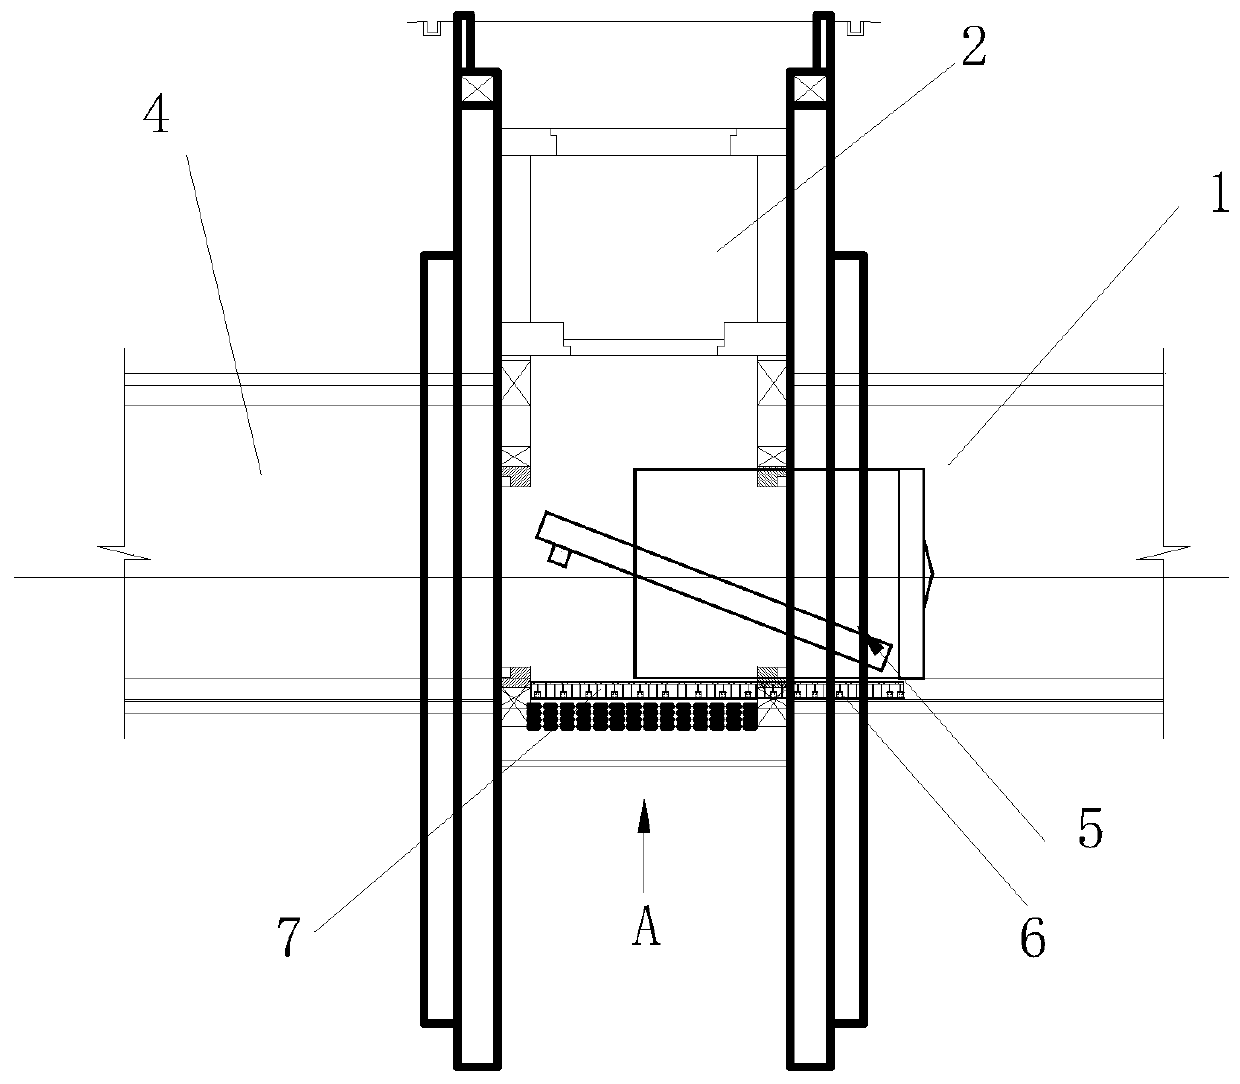 A method for hoisting shield machine in a narrow space near the business line